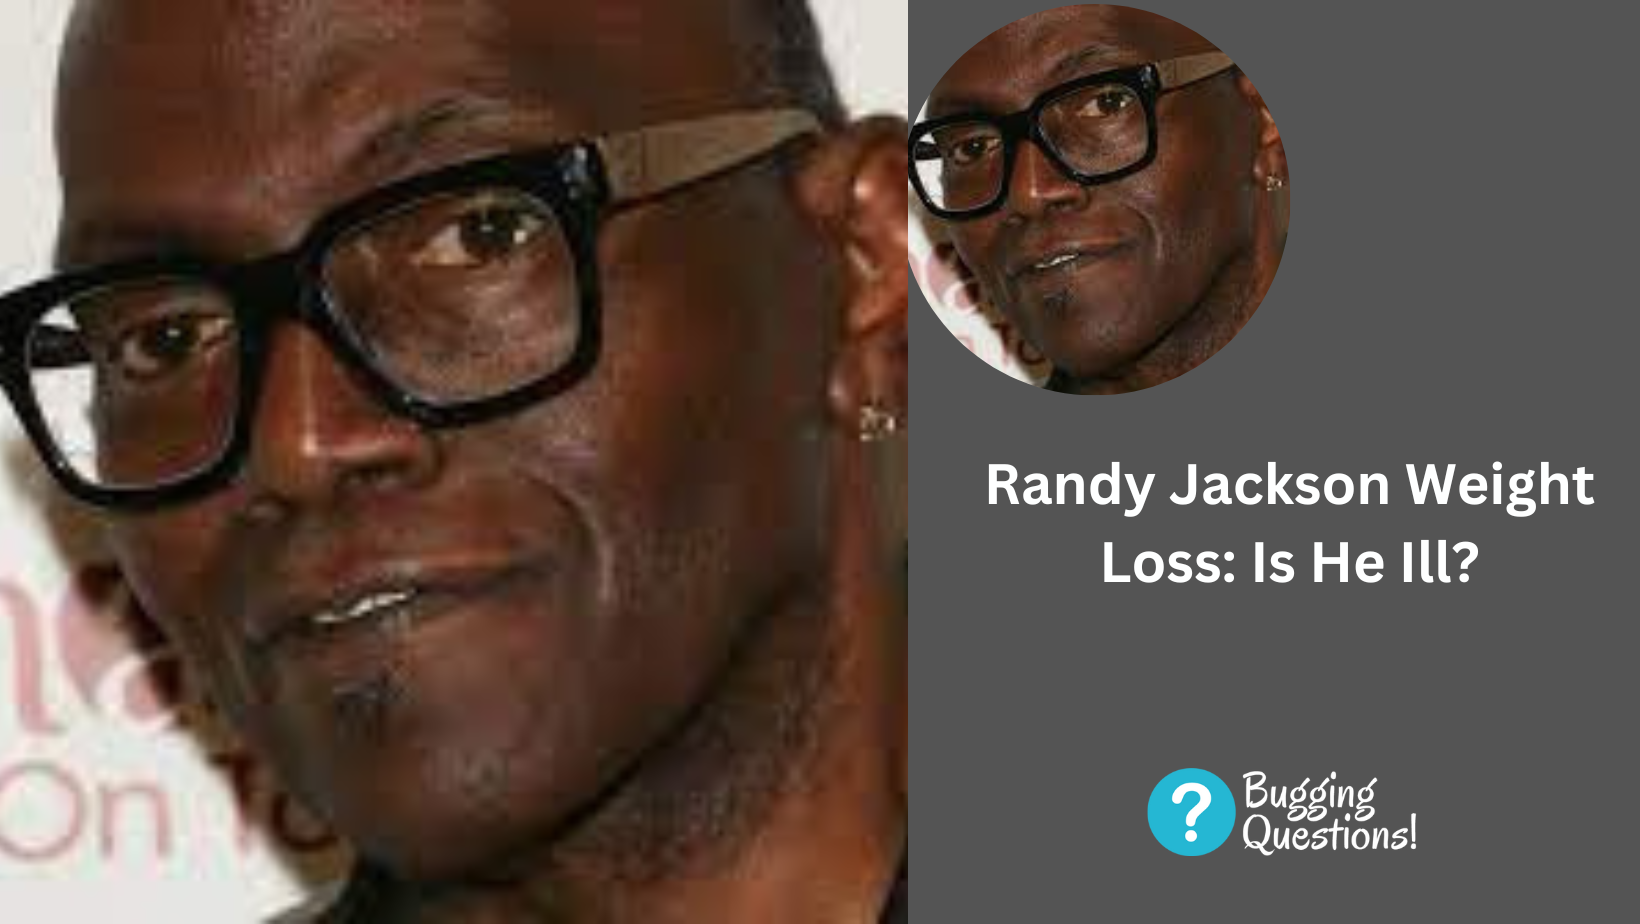 Randy Jackson Weight Loss: Is He Ill?